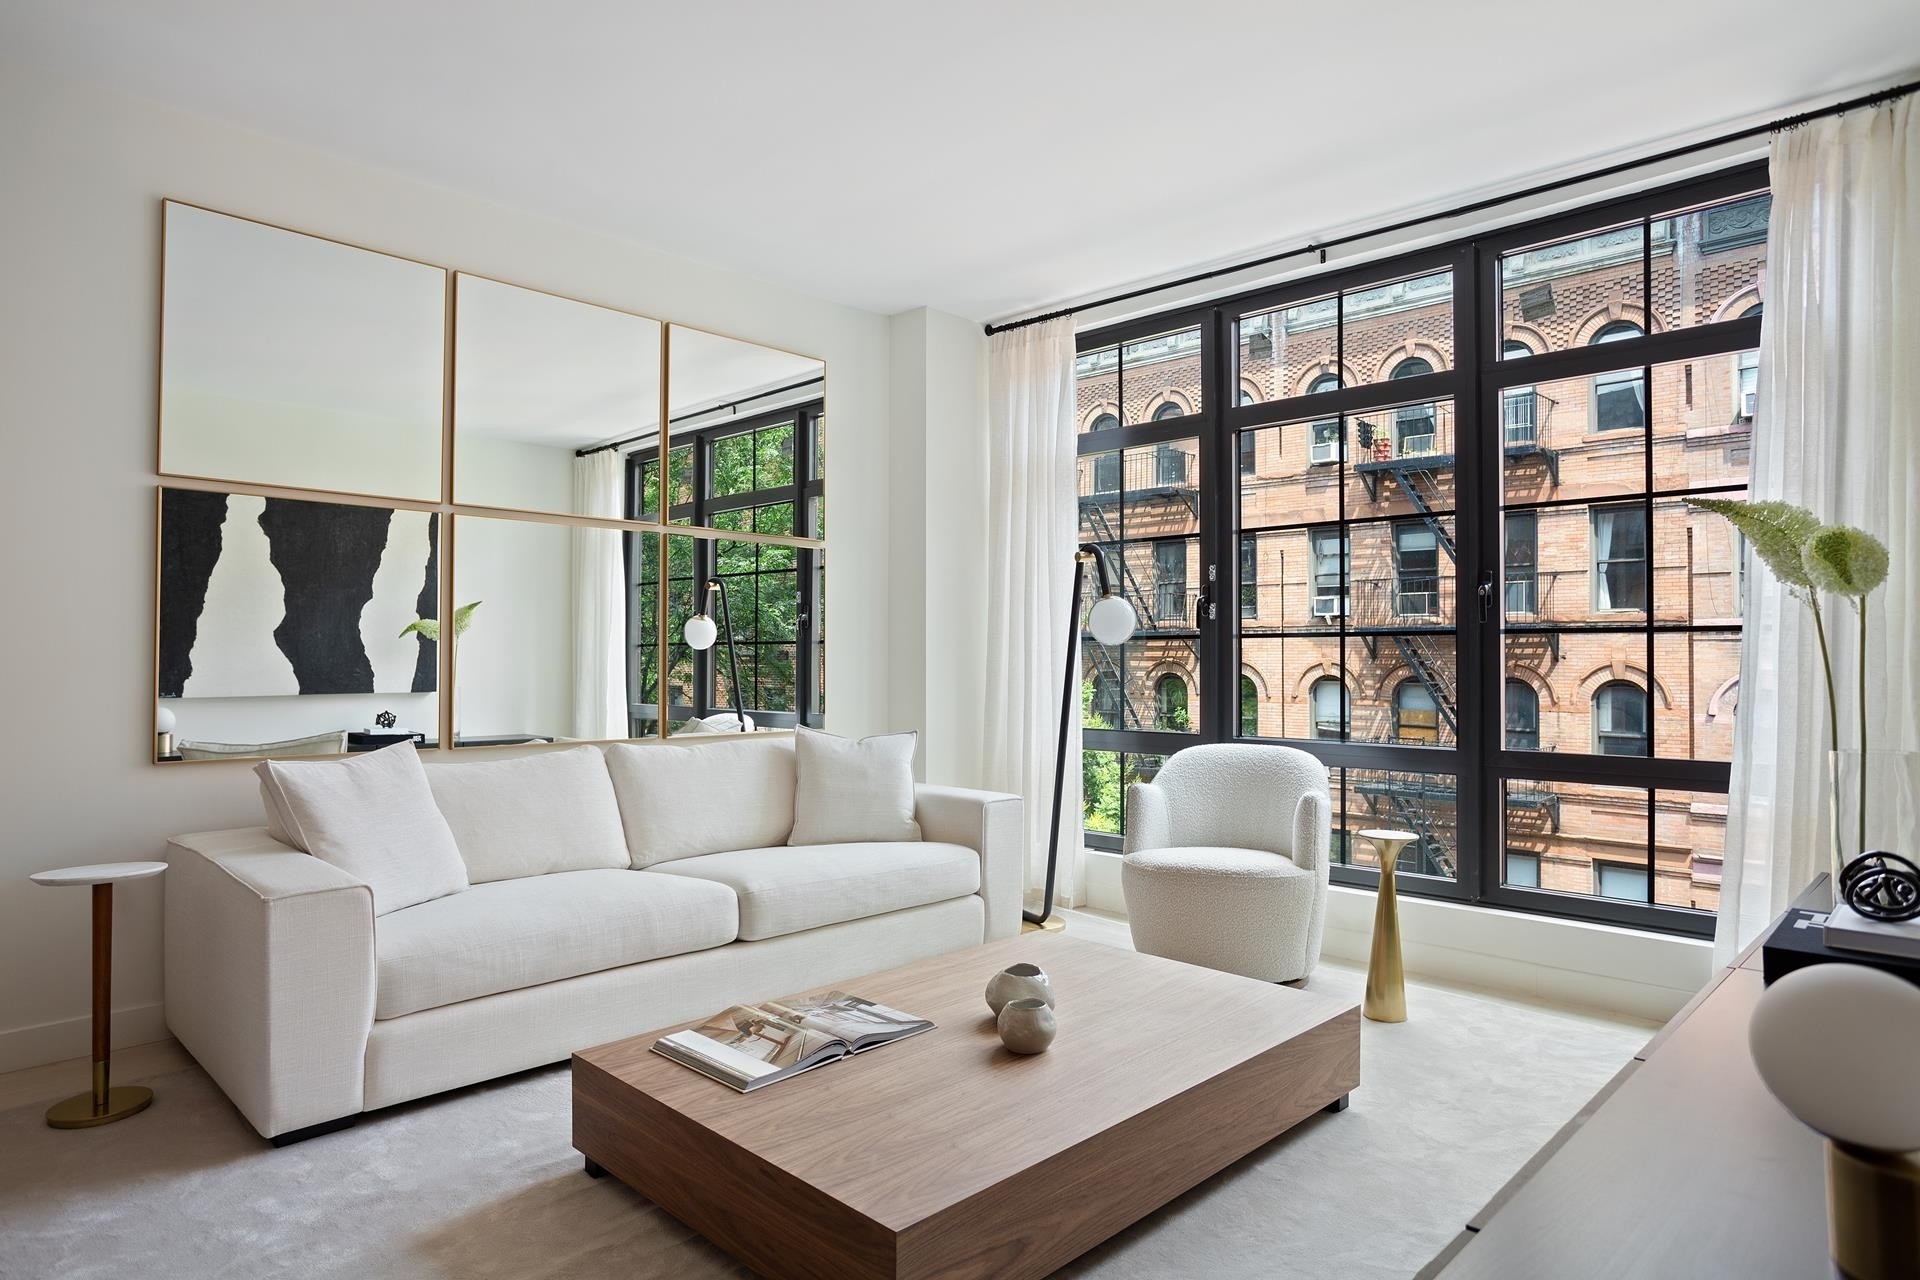 Condominium for Sale at The Marx, 324 E 93RD ST, PENTHOUSE Yorkville, New York, NY 10128